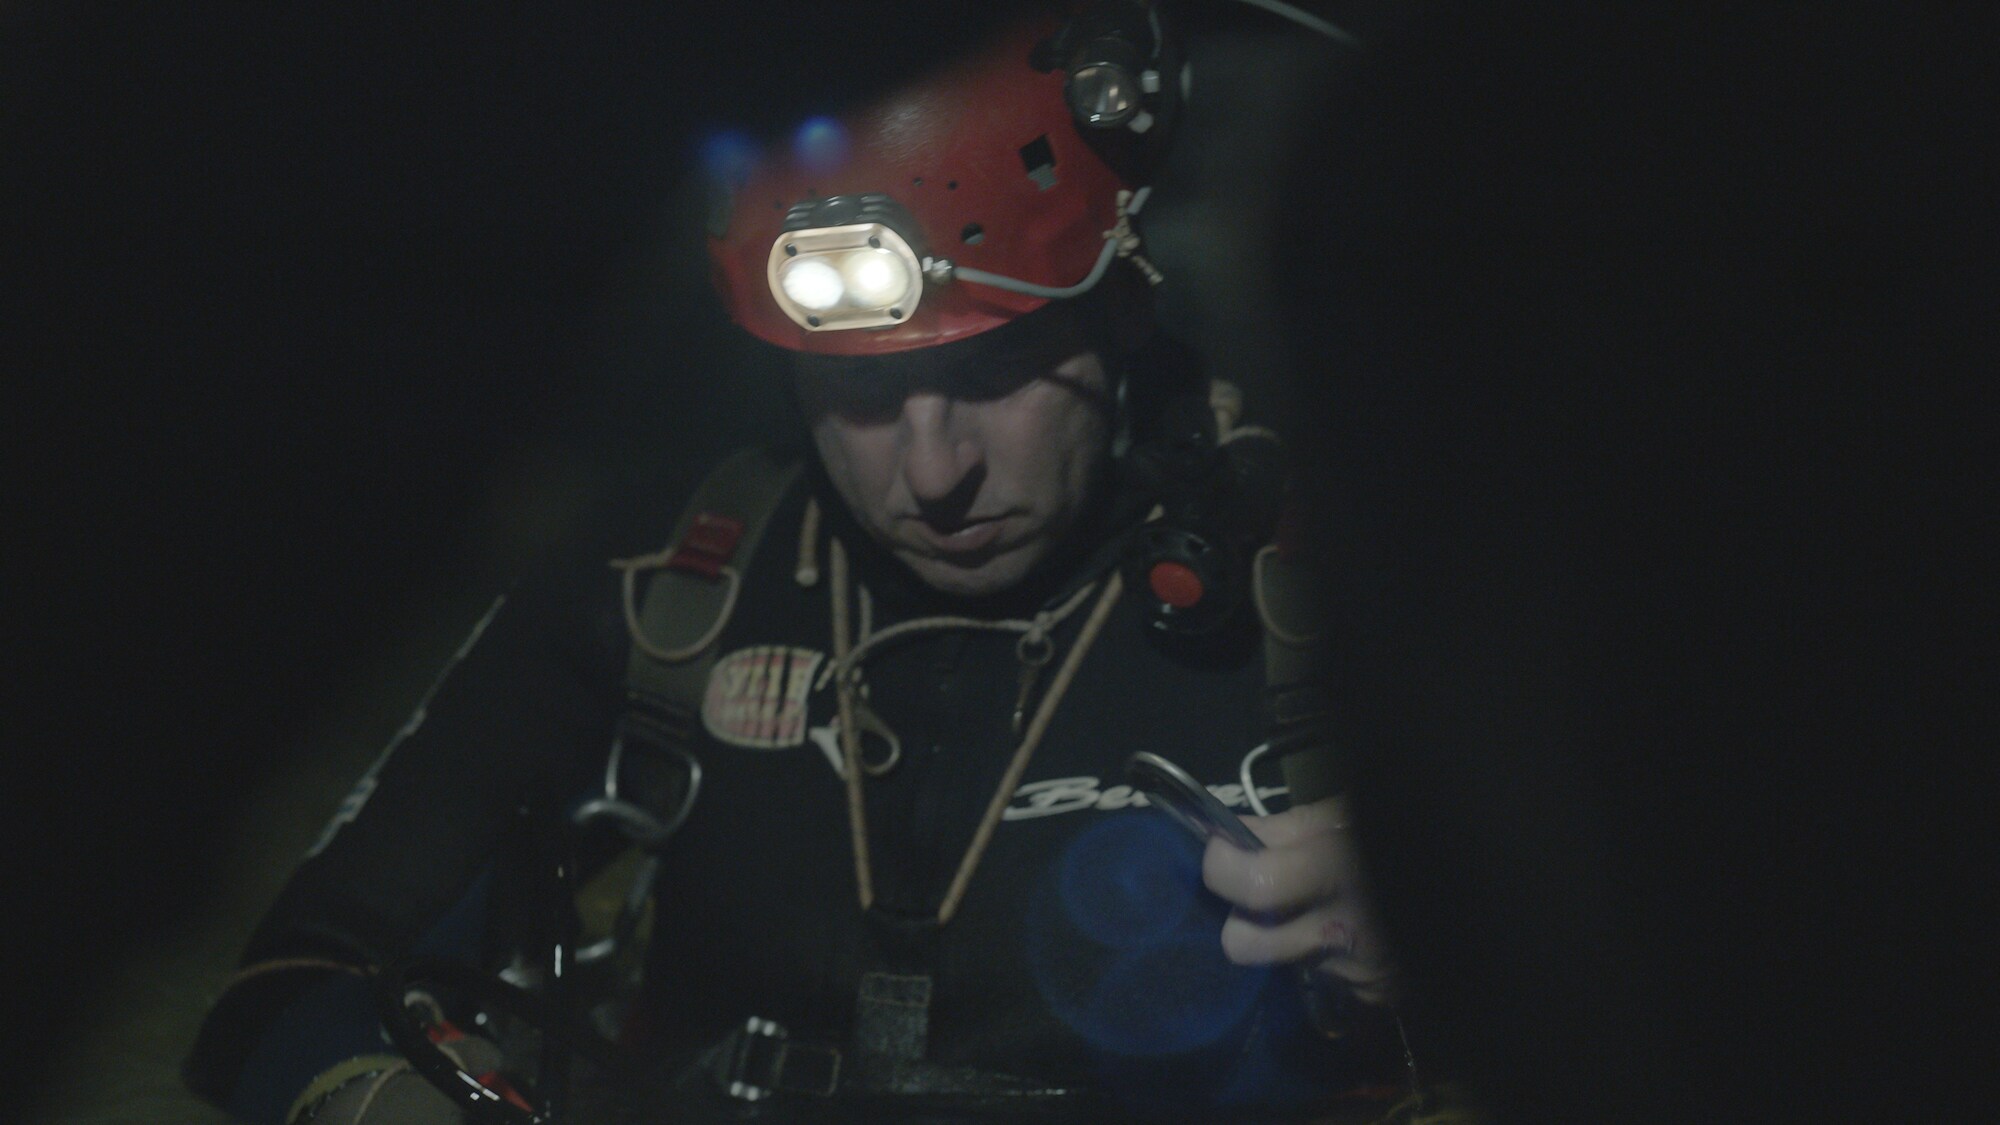 Cave diver, Rick Stanton, preps for dive.  THE RESCUE chronicles the 2018 rescue of 12 Thai boys and their soccer coach, trapped deep inside a flooded cave. E. Chai Vasarhelyi and Jimmy Chin reveal the perilous world of cave diving, bravery of the rescuers, and dedication of a community that made great sacrifices to save these young boys. (Credit: National Geographic)